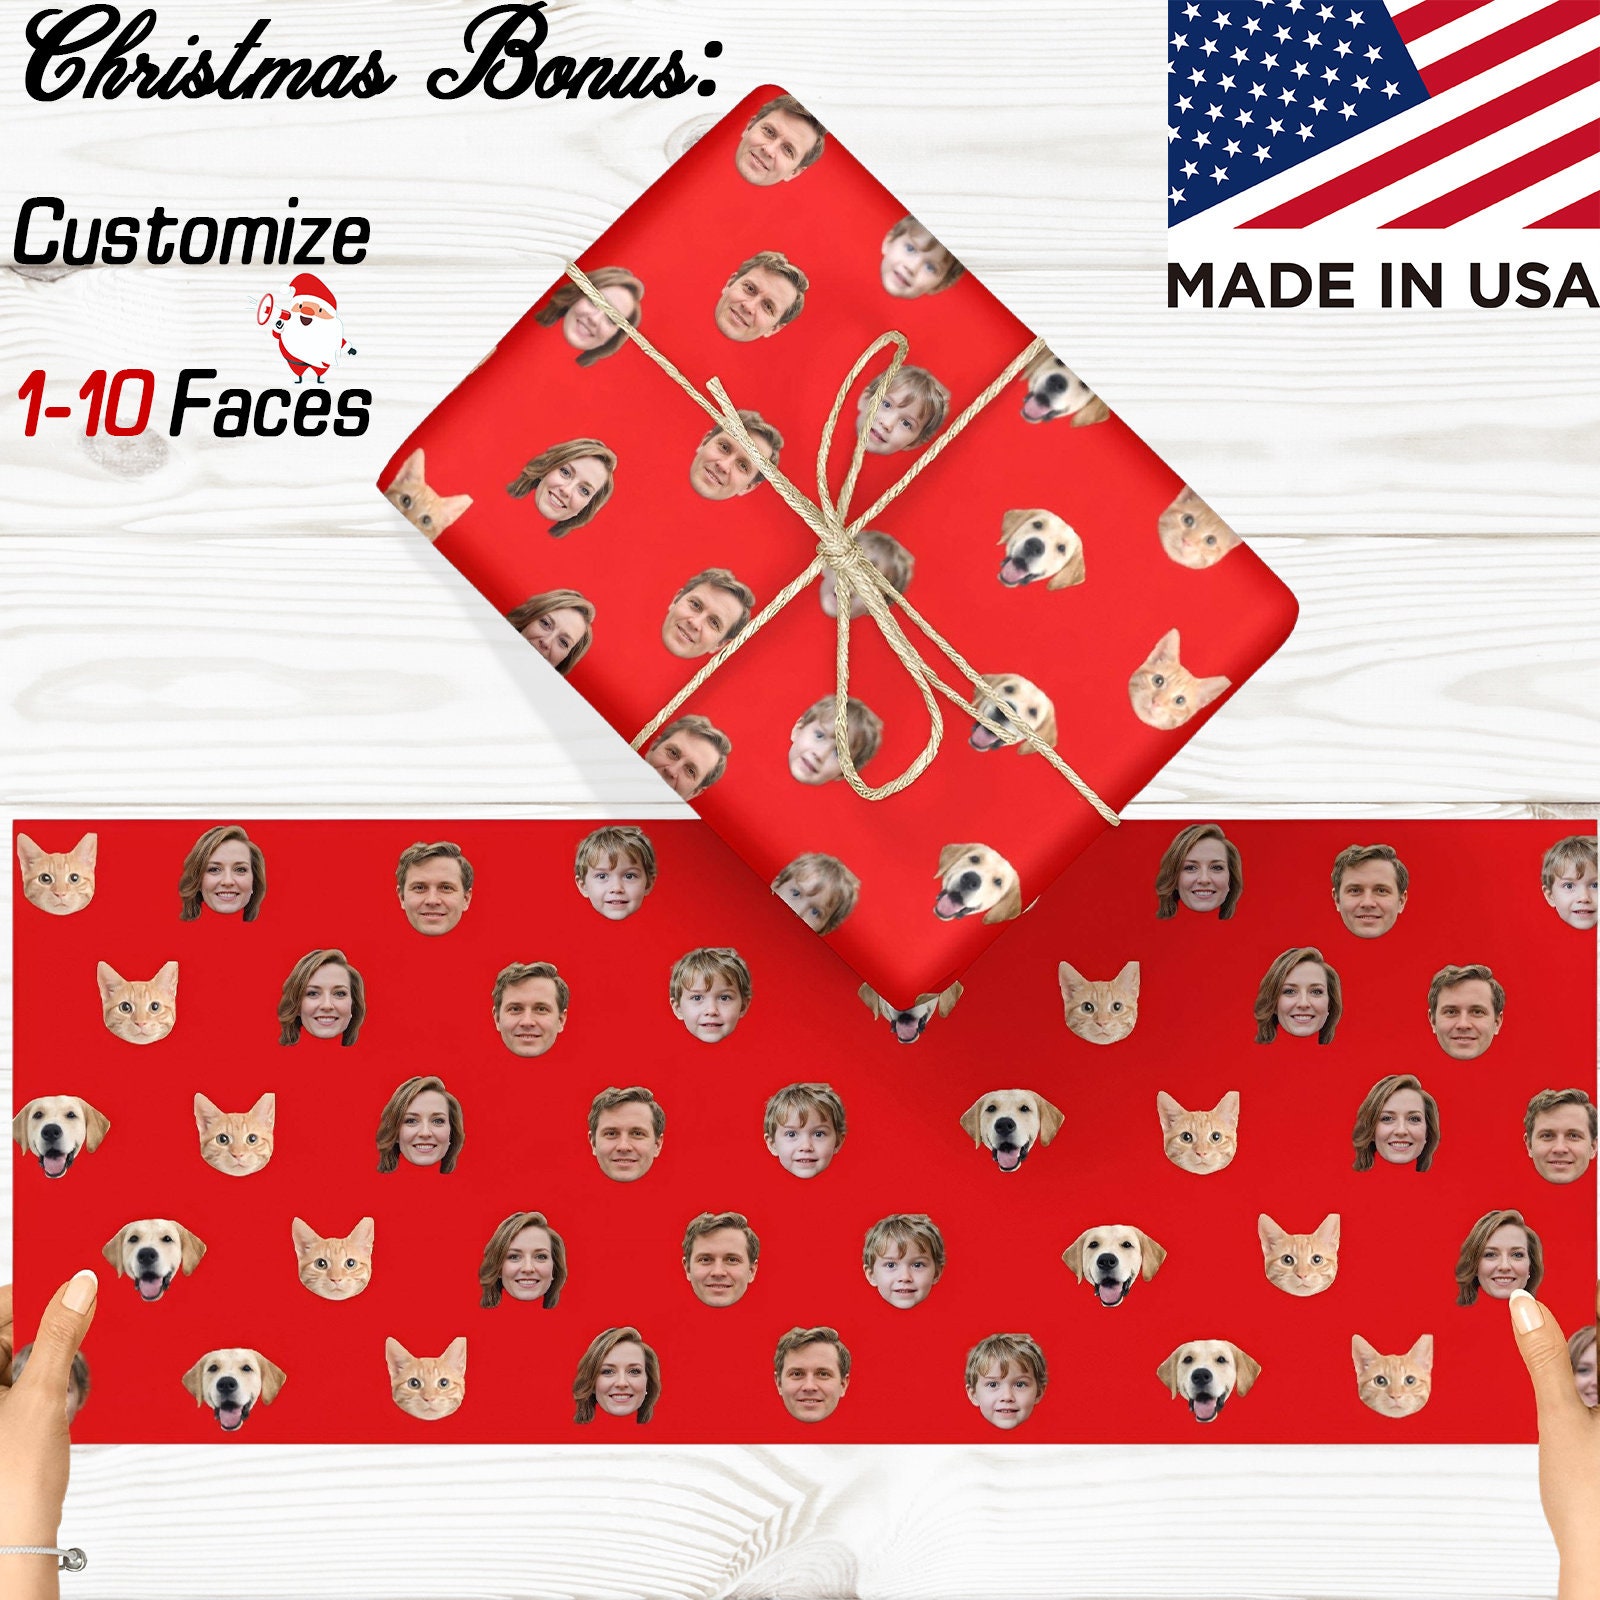 10,000+ Custom Printed Food Wrapping Paper 40 GSM Oilproof, Greaseproof